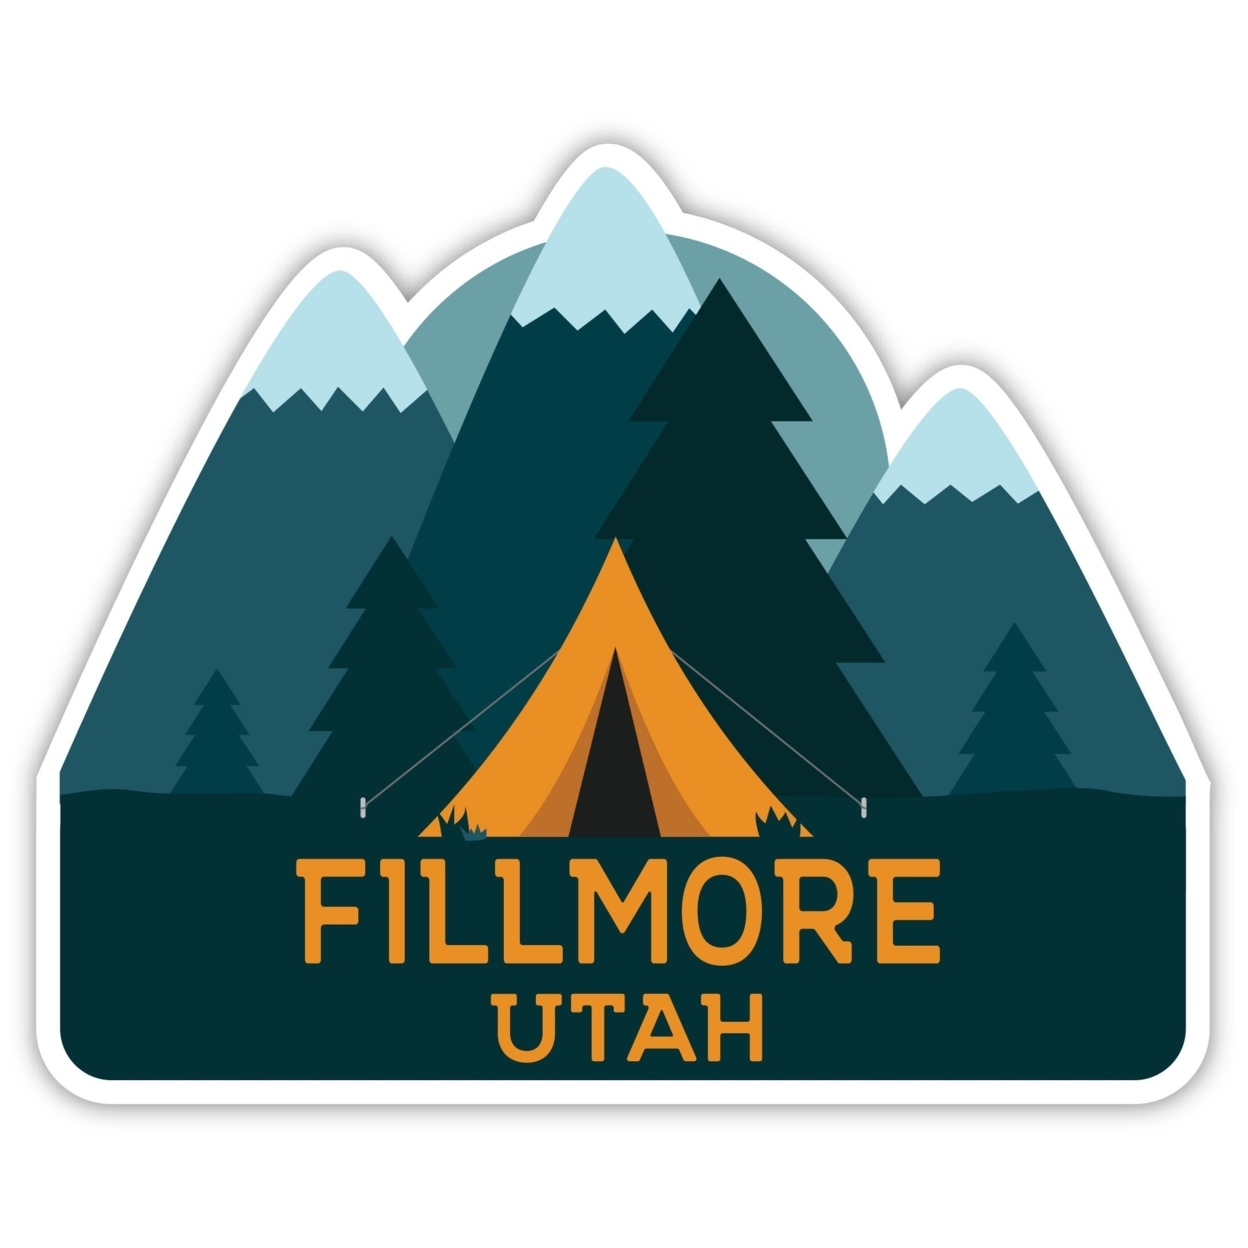 Fillmore Utah Souvenir Decorative Stickers (Choose Theme And Size) - 4-Pack, 2-Inch, Tent